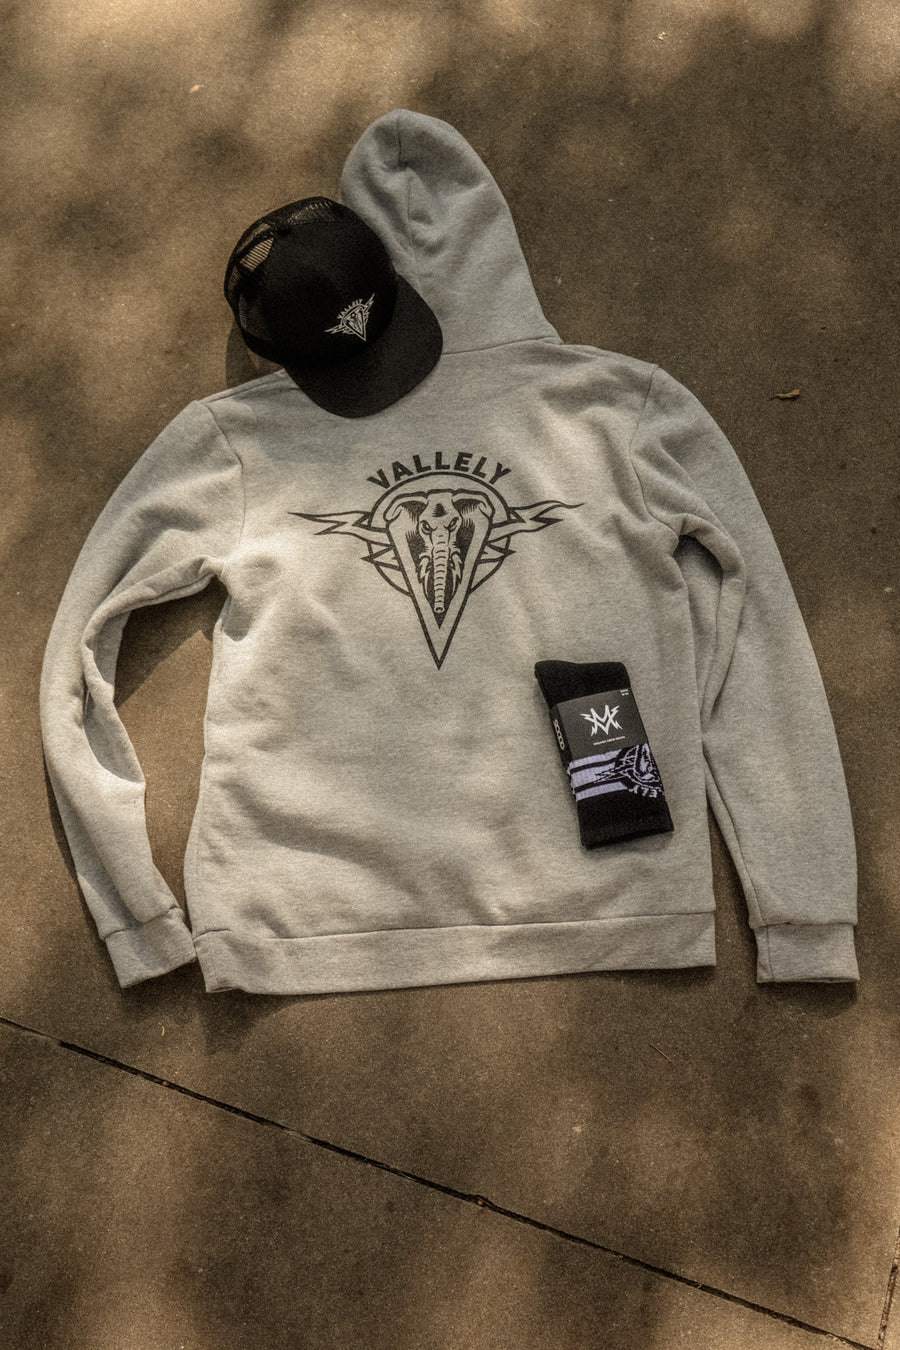 Dirty Donny x Mike Vallely Collaboration Line products: Black Logo Hat, Heather Grey Hoodie, and Black Crew Socks with custom DD x MV sock wrap.